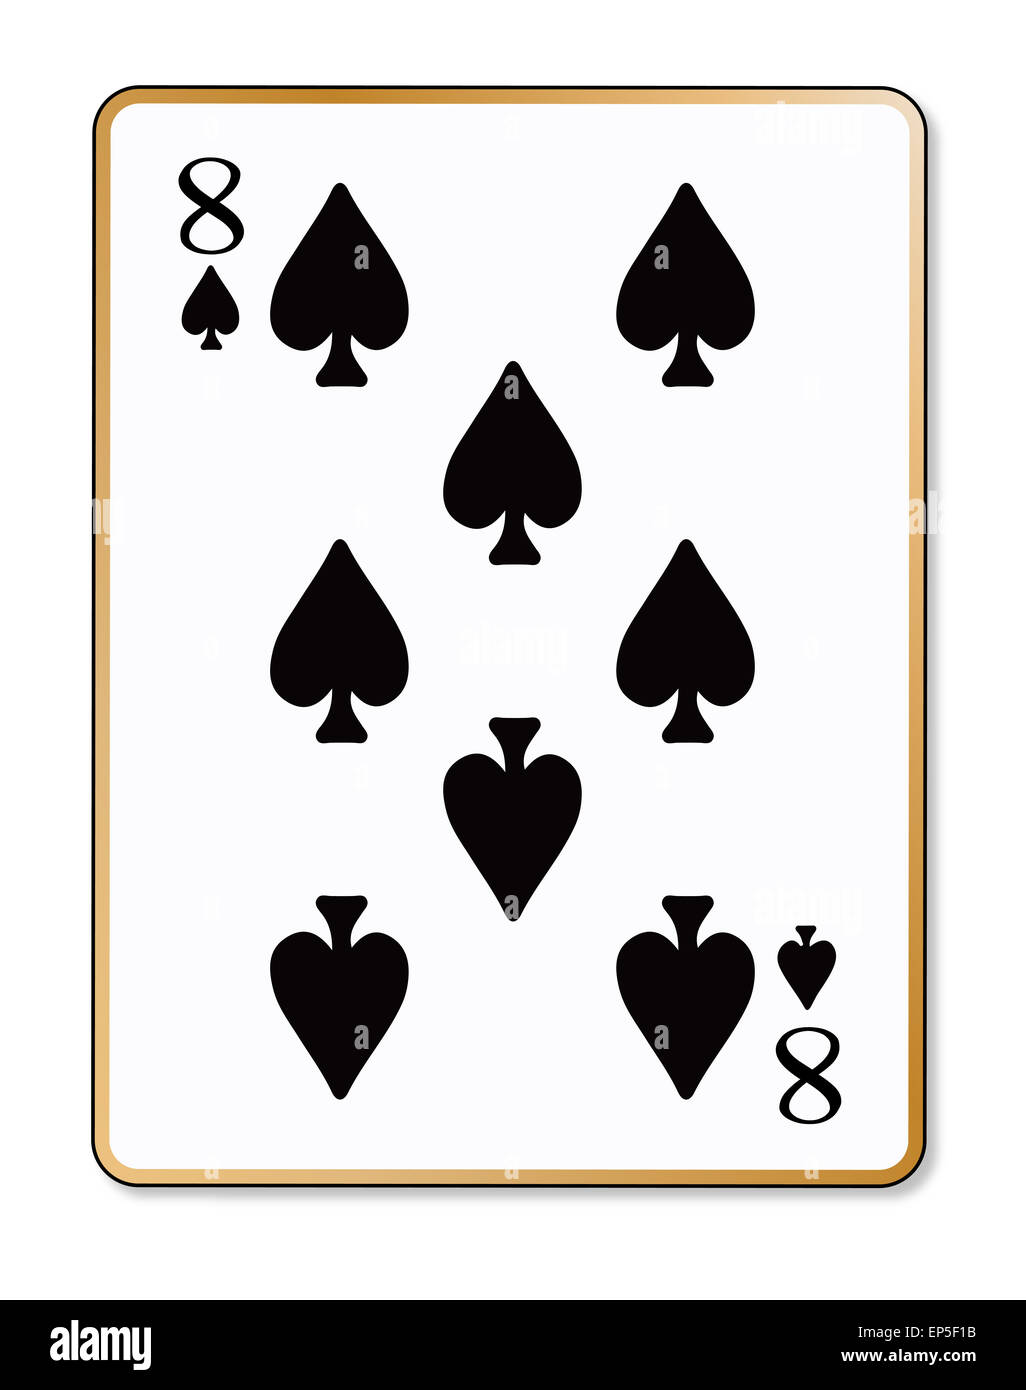 The playing card the Eight of spades over a white background Stock Photo